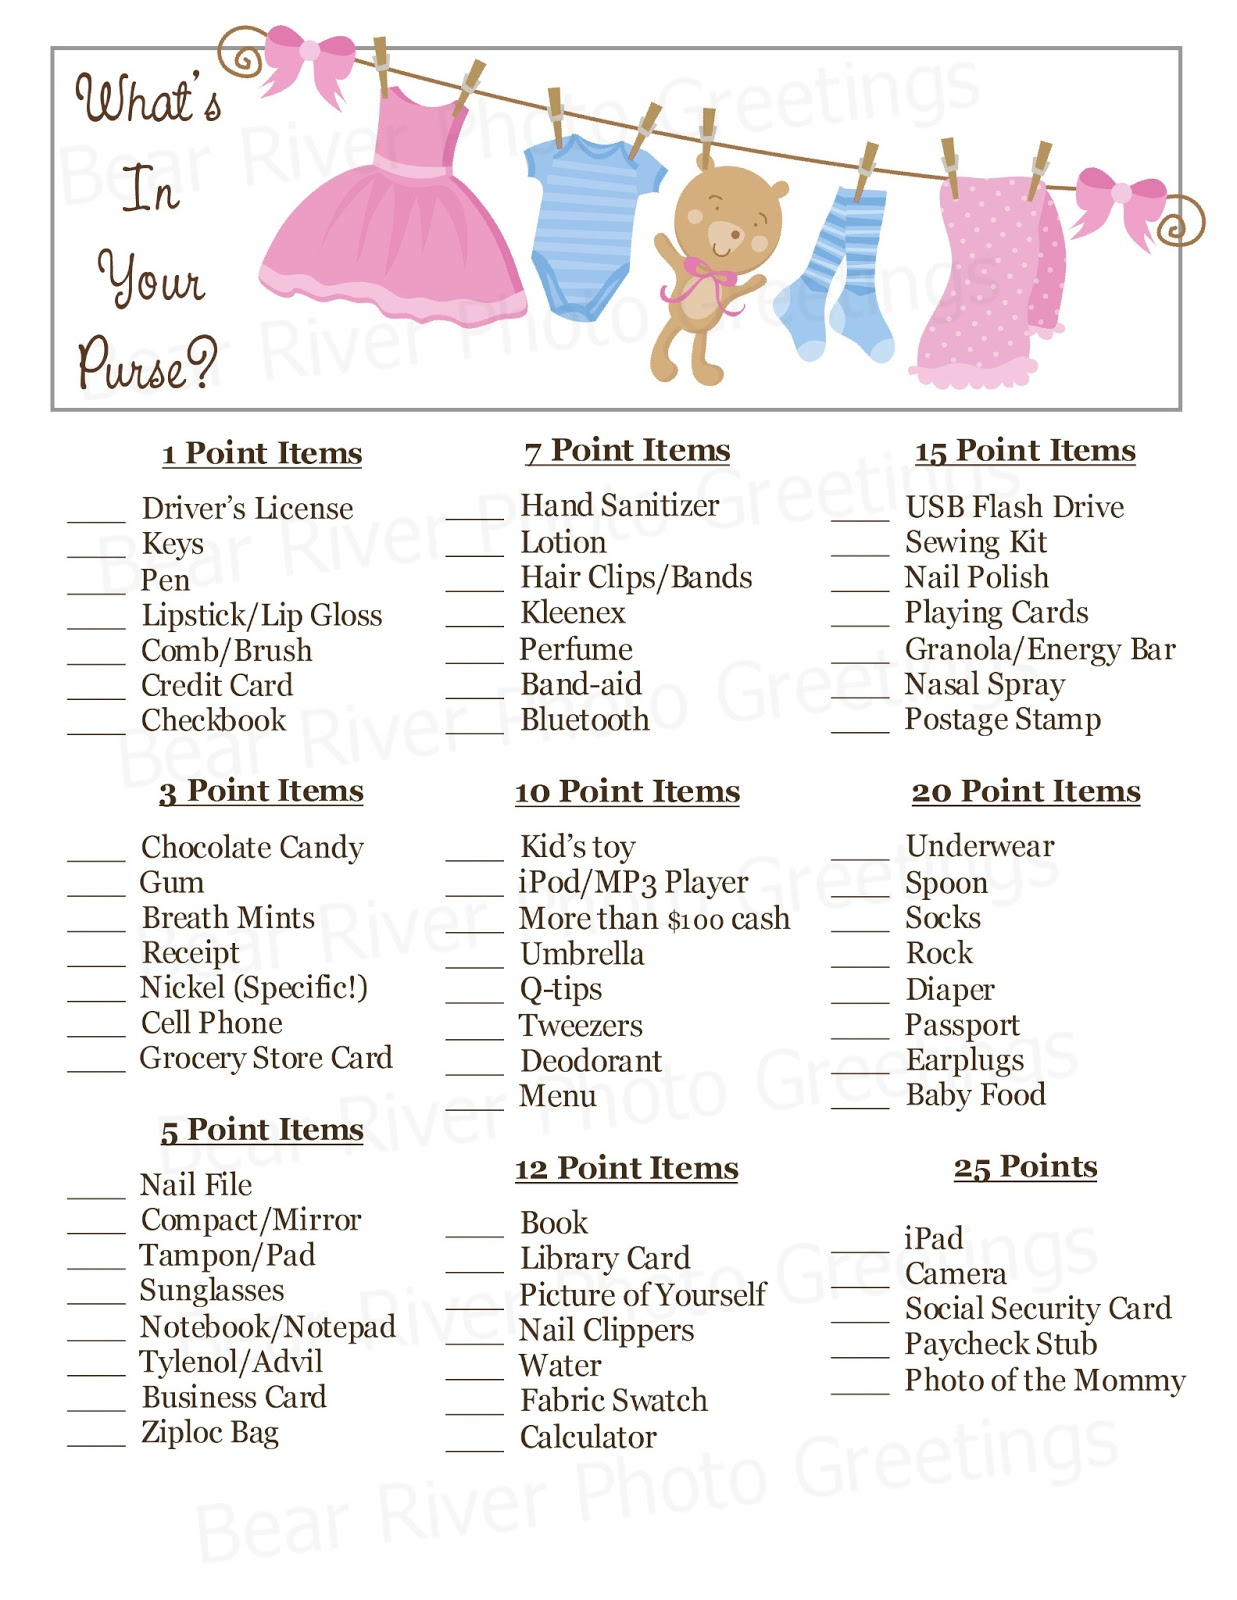 Bear River Photo Greetings: 2013 - Free Printable Baby Shower Game What&amp;#039;s In Your Purse